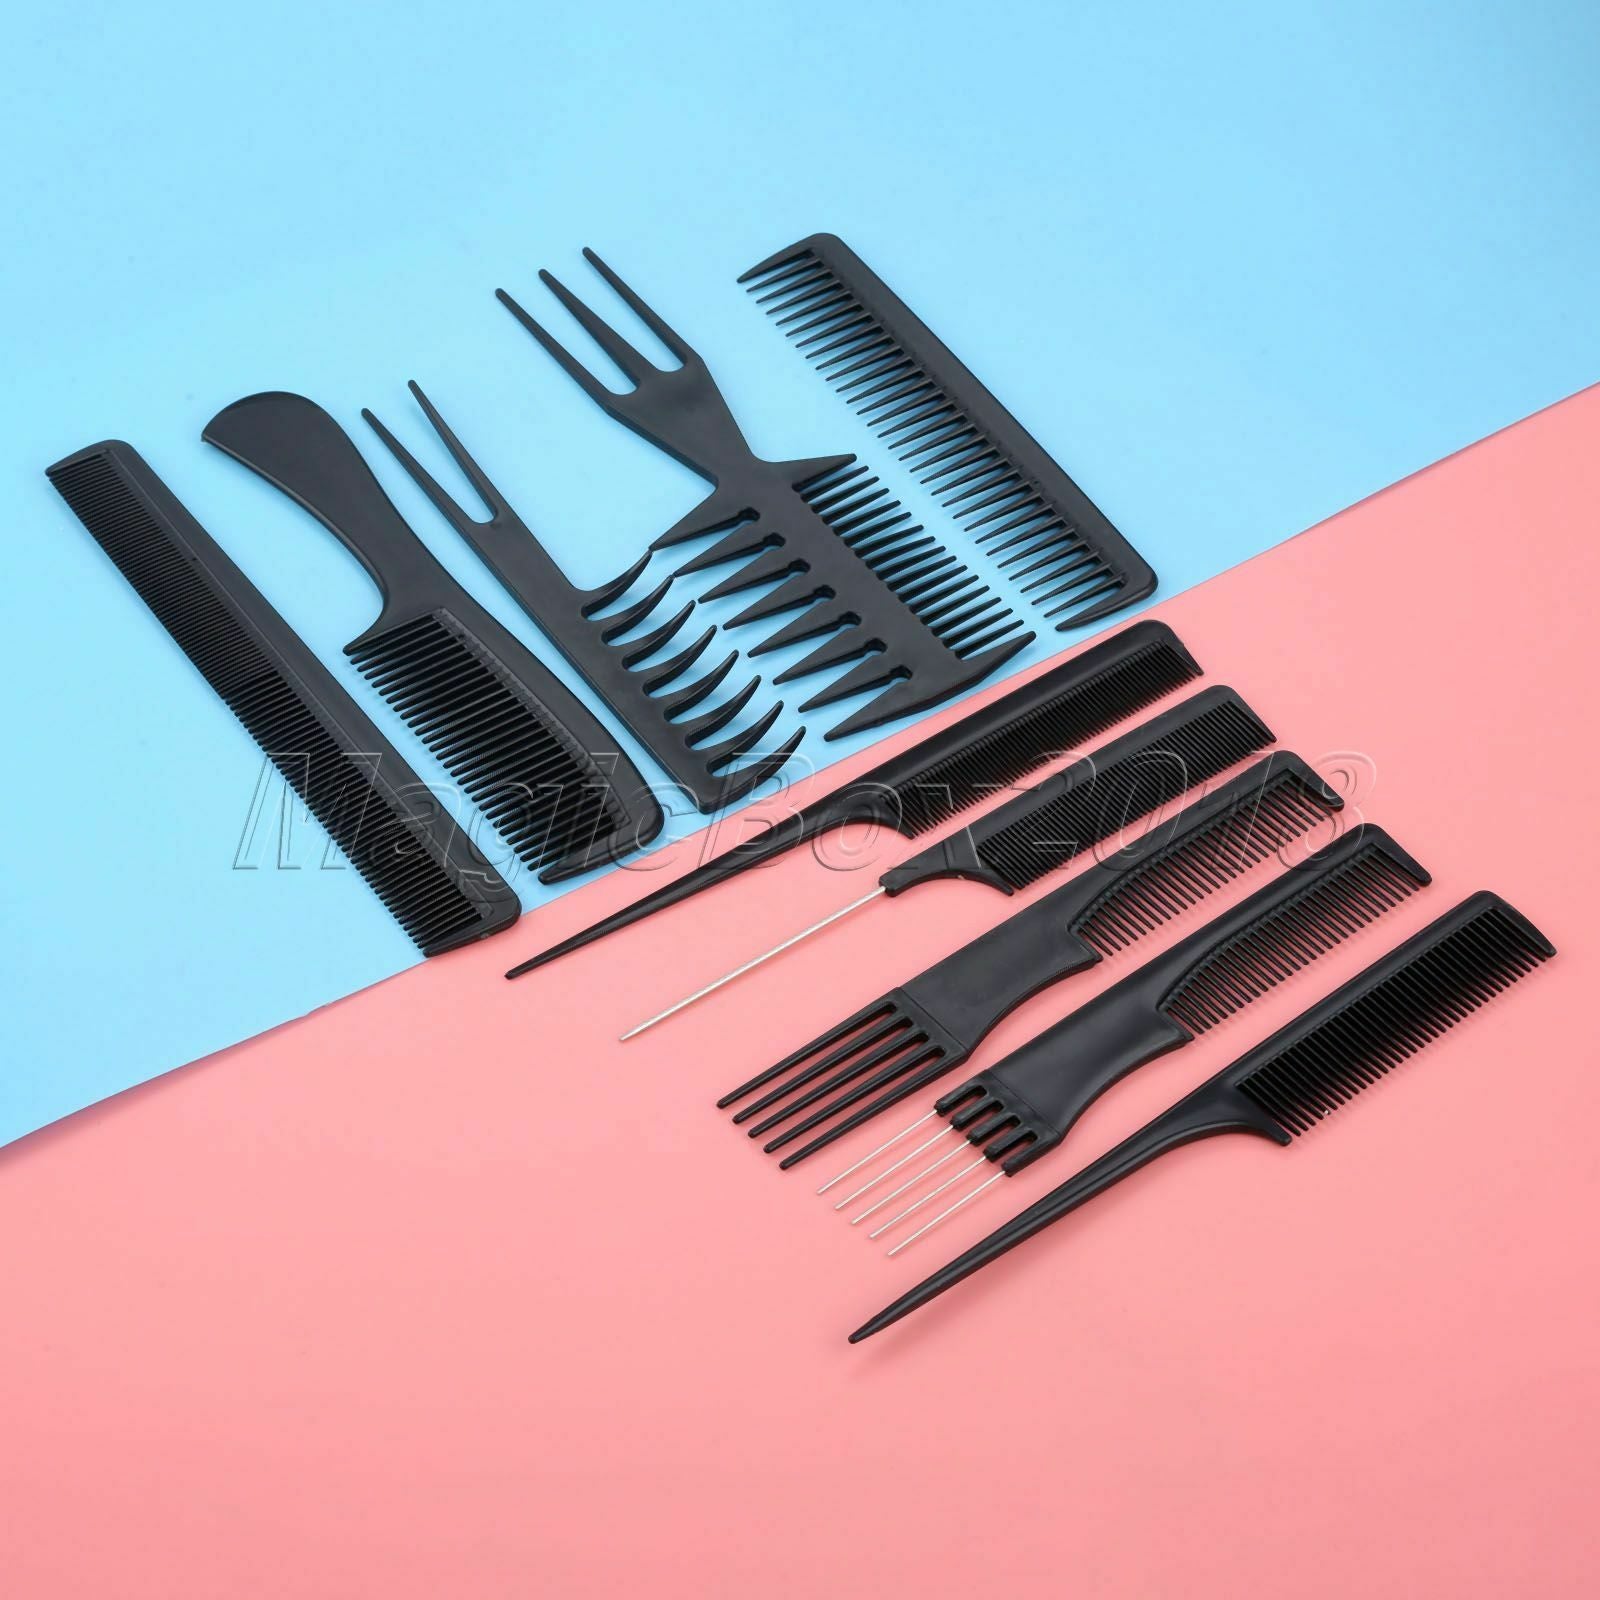 10Pcs/Set Hairdressing Comb Brush for Salon Barber Hair Styling Dyeing Cutting